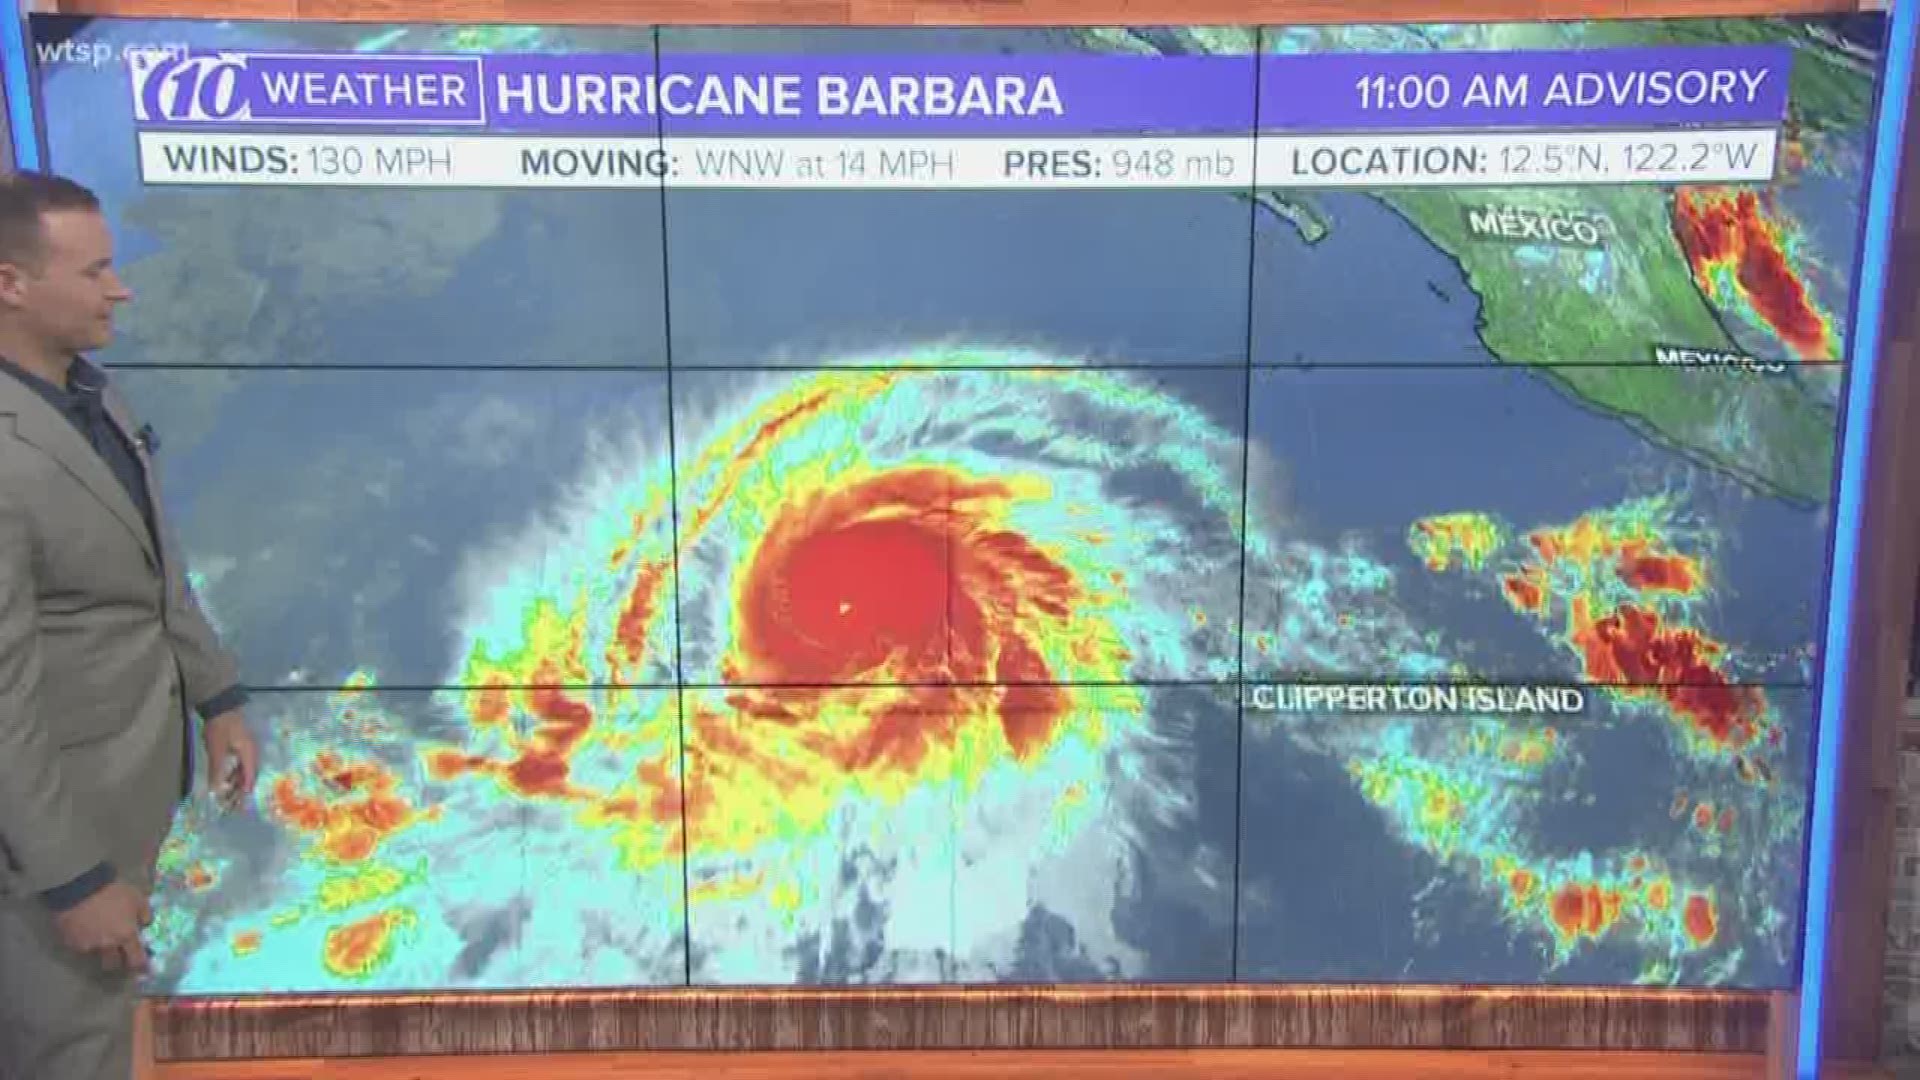 Hurricane Barbara has strengthened to become a category 4 storm with winds at 130 miles per hour.

The storm in the Pacific Ocean is expected to continue to strengthen today as it tracks generally to the west. It's expected to begin weakening Wednesday and will continue to weaken as it tracks closer to the Hawaiian Islands.

The storm will be a remnant low, if that, by next Tuesday when it's expected to bring the Hawaiian Islands a better chance of rain.